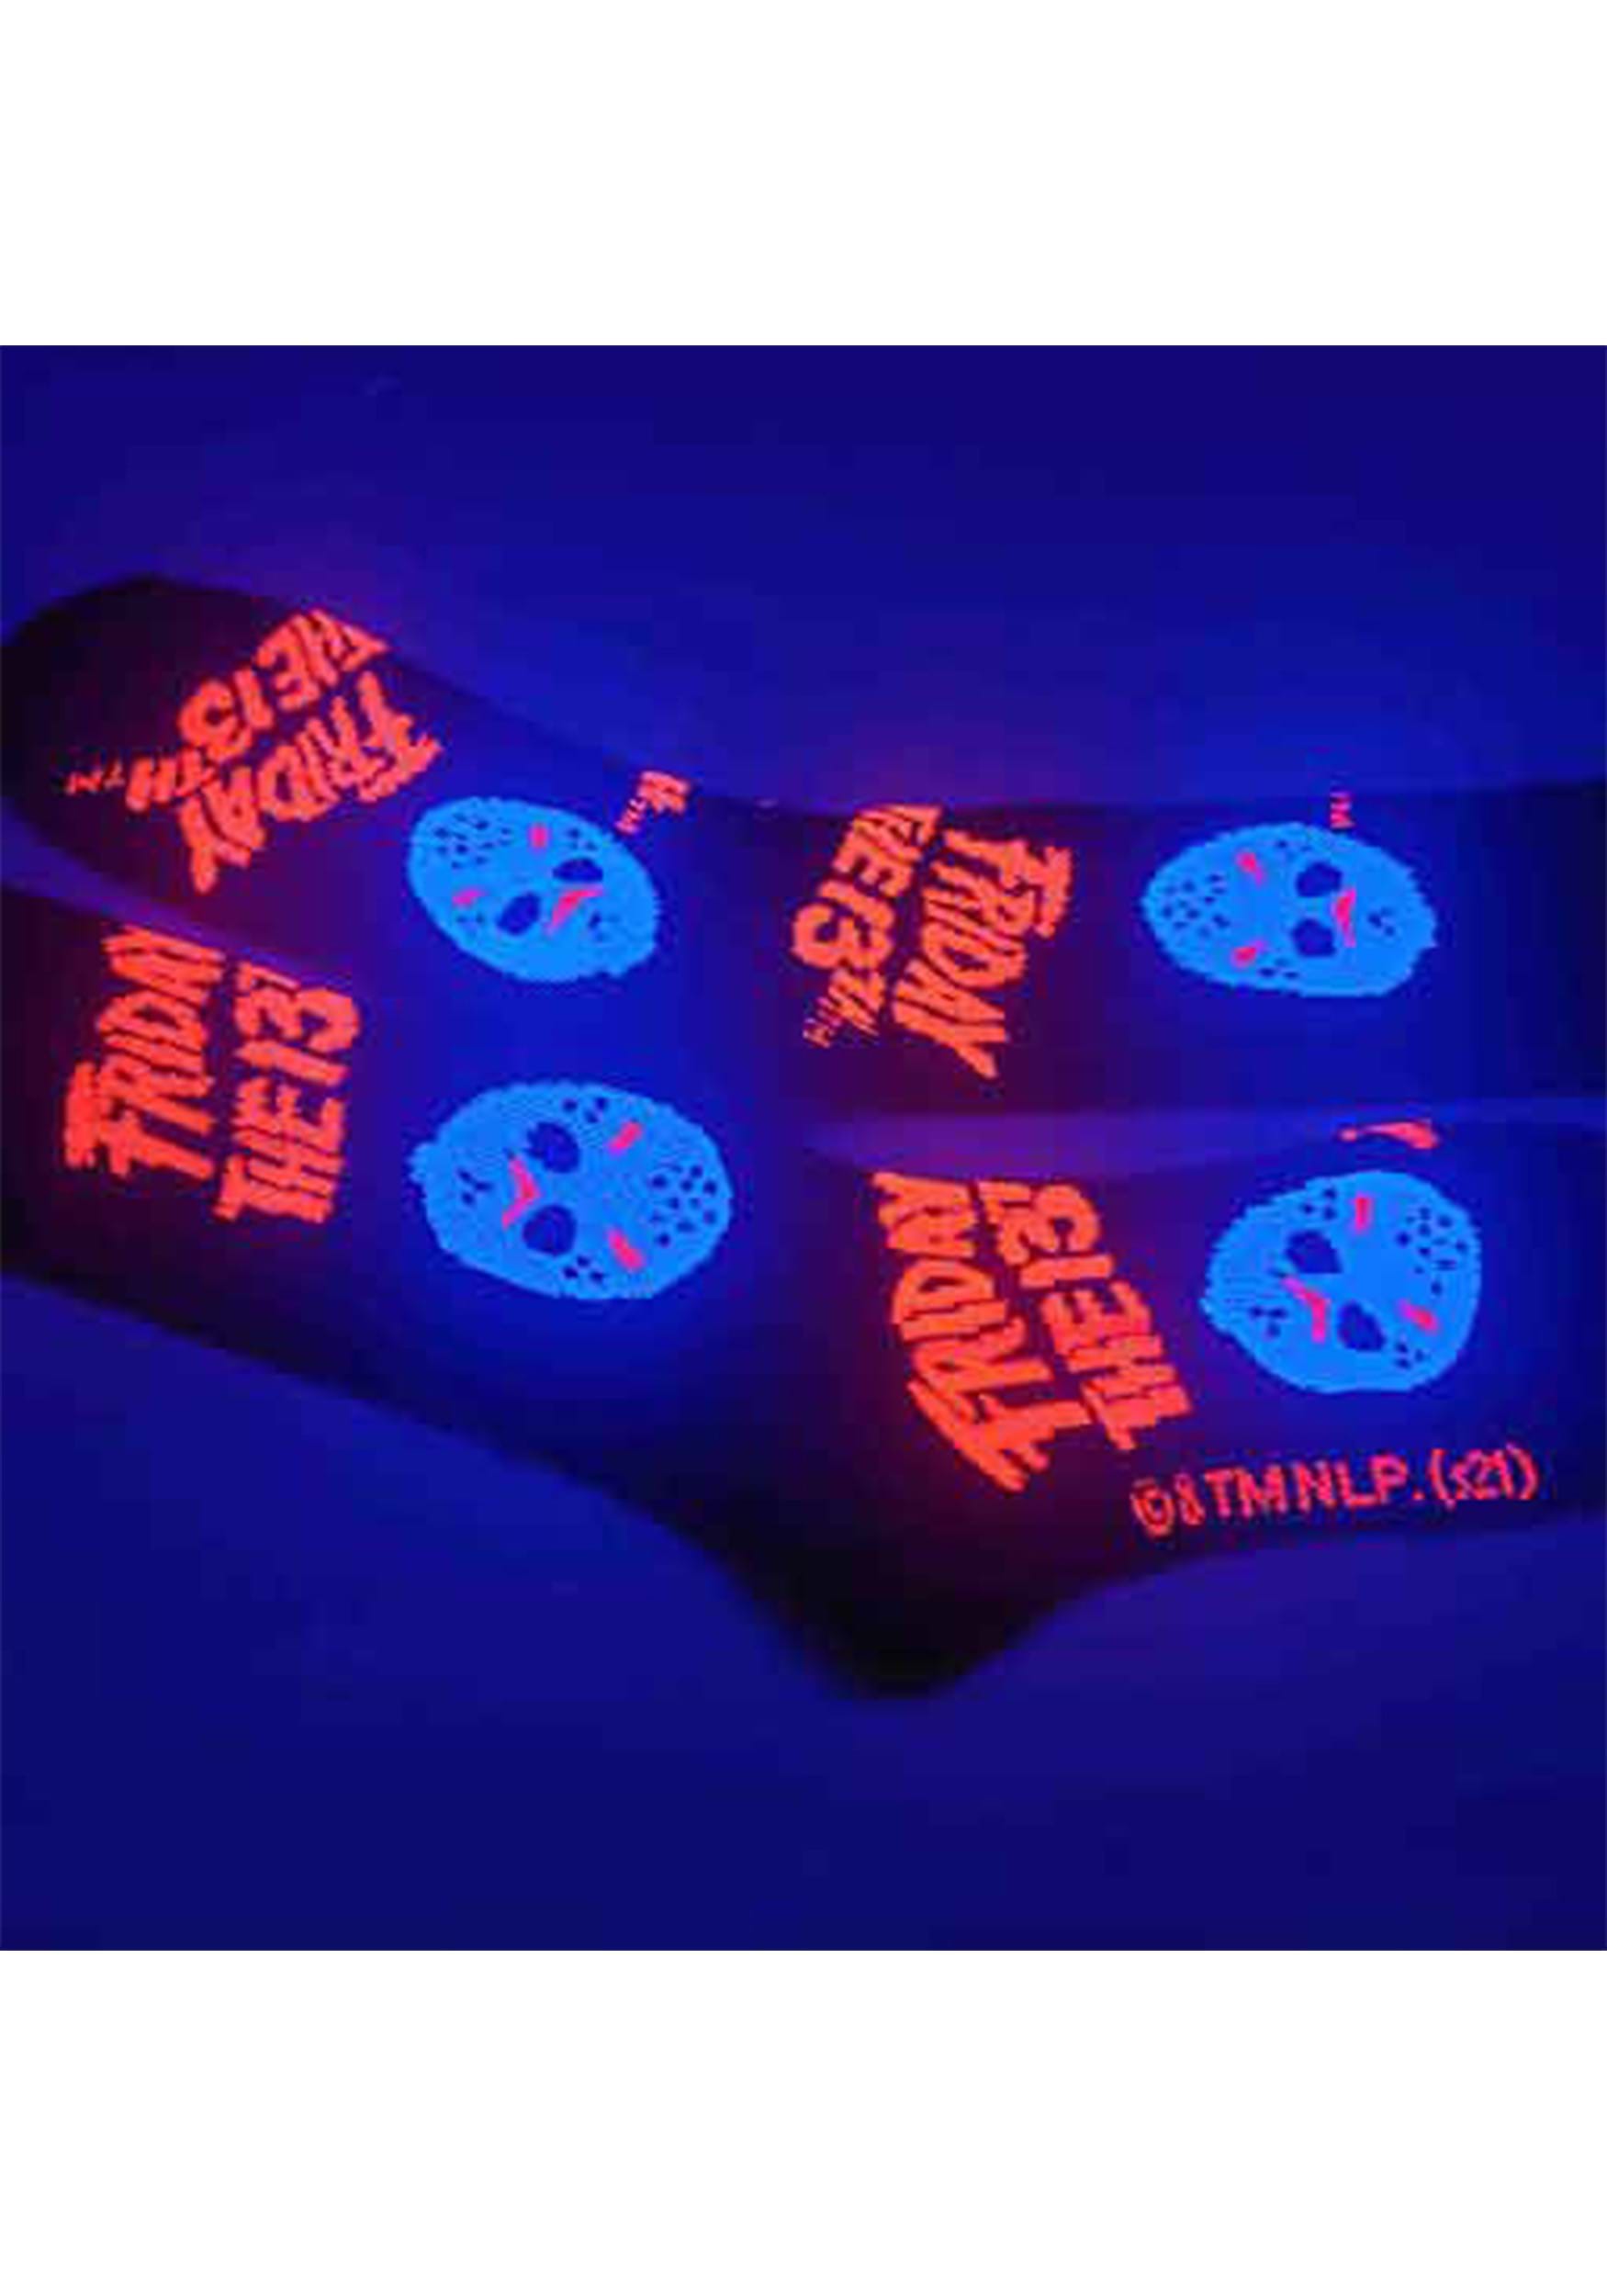 Friday The 13th Icons Black Light Crew Sock For Adults